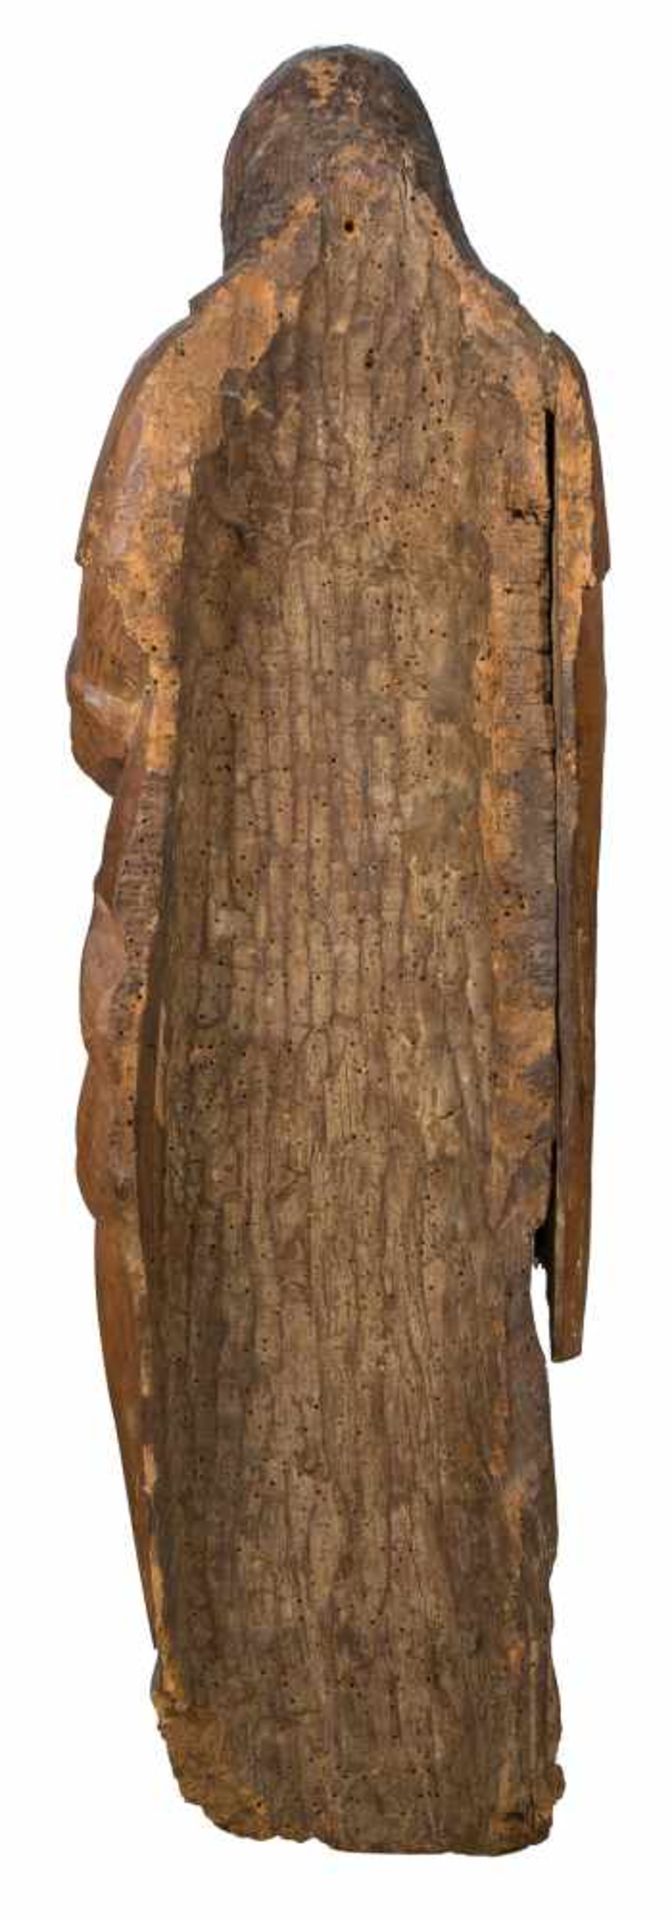 Saint Anthony Carved wooden sculpture. Early 16th century.Saint Anthony Carved wooden sculpture. - Bild 5 aus 5